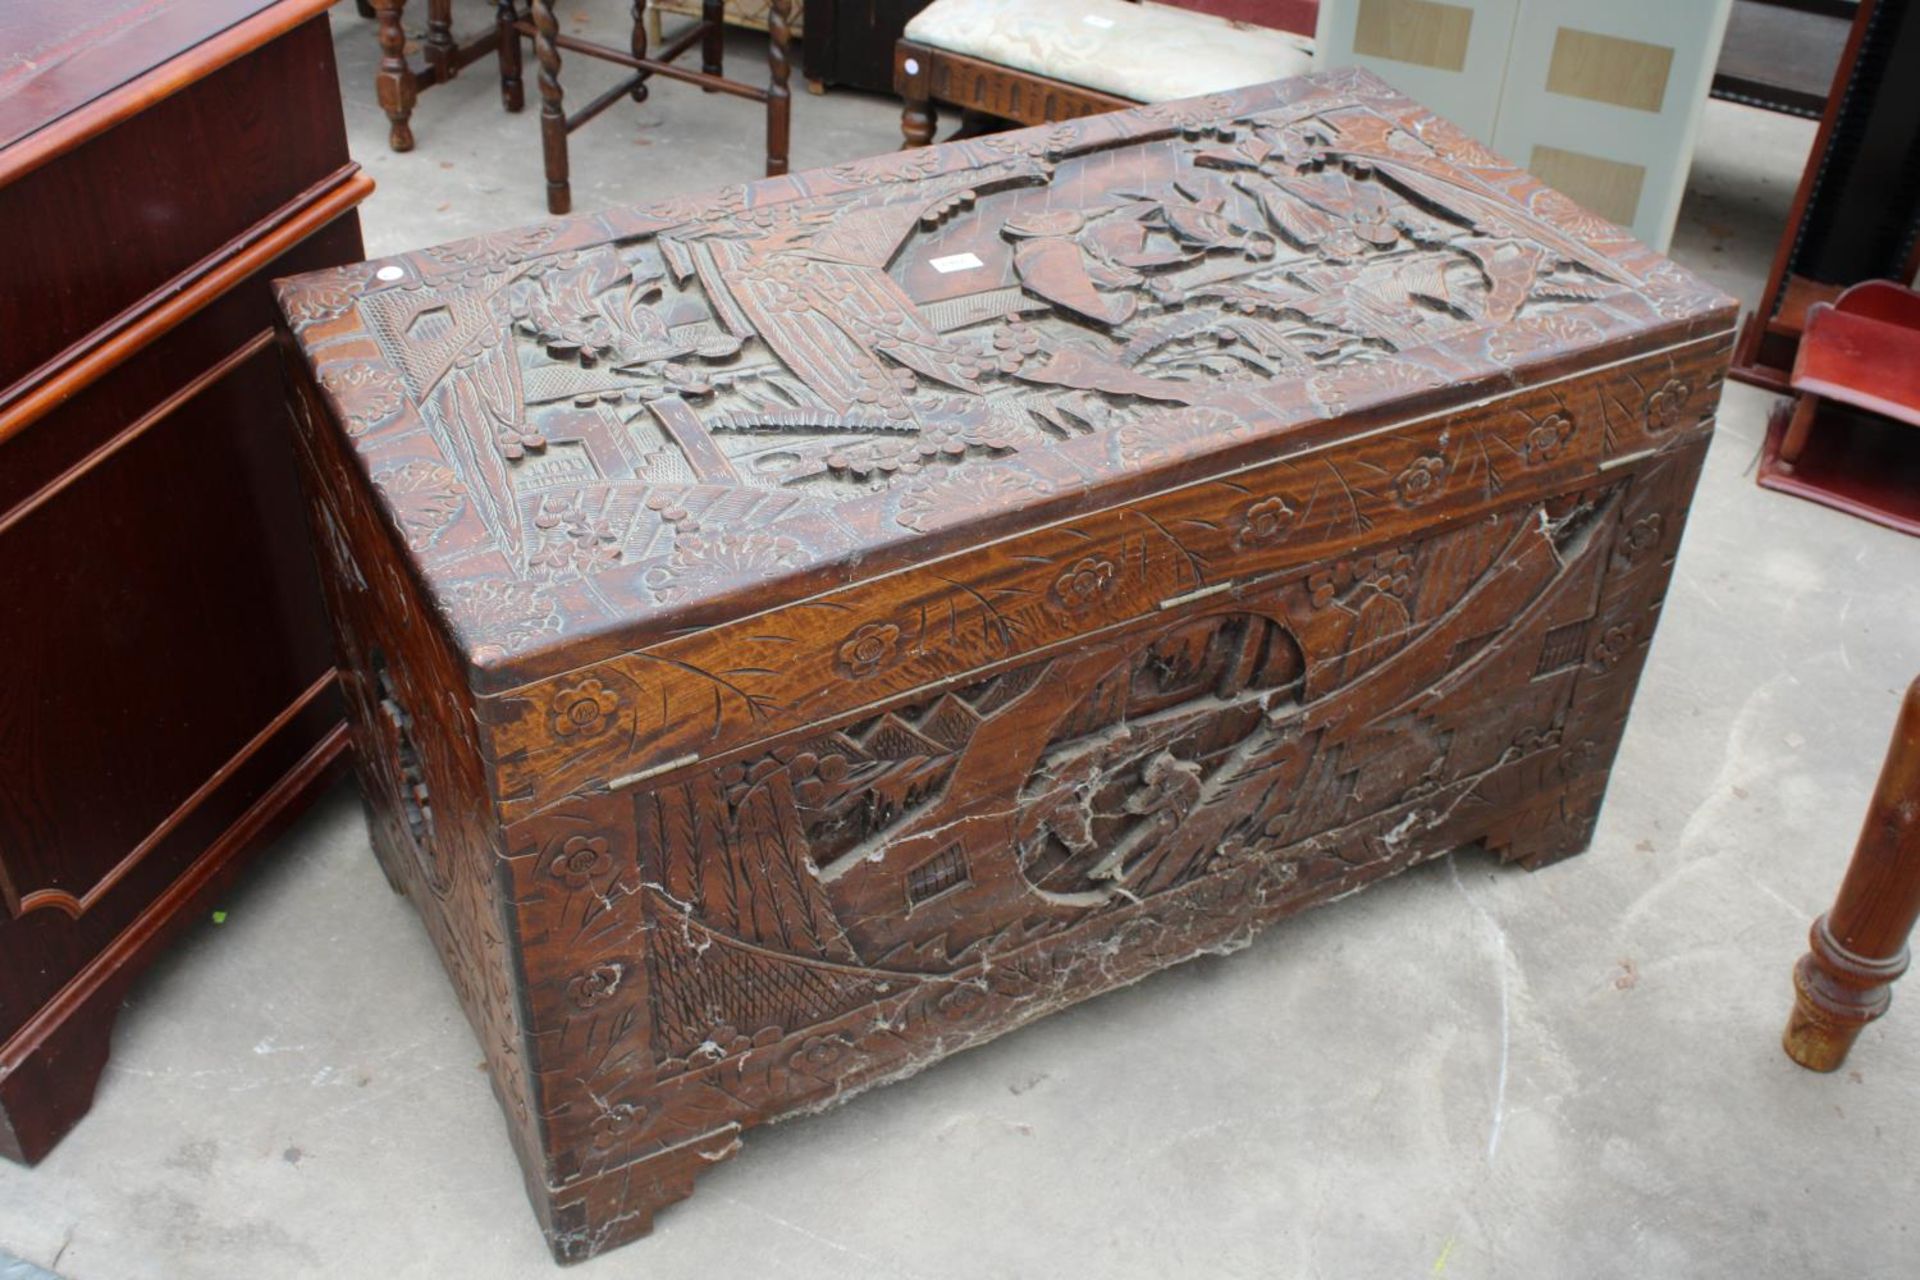 AN ORIENTAL CAMPHOR WOOD CARVED BLANKET CHEST, 41" X 20" - Image 5 of 9